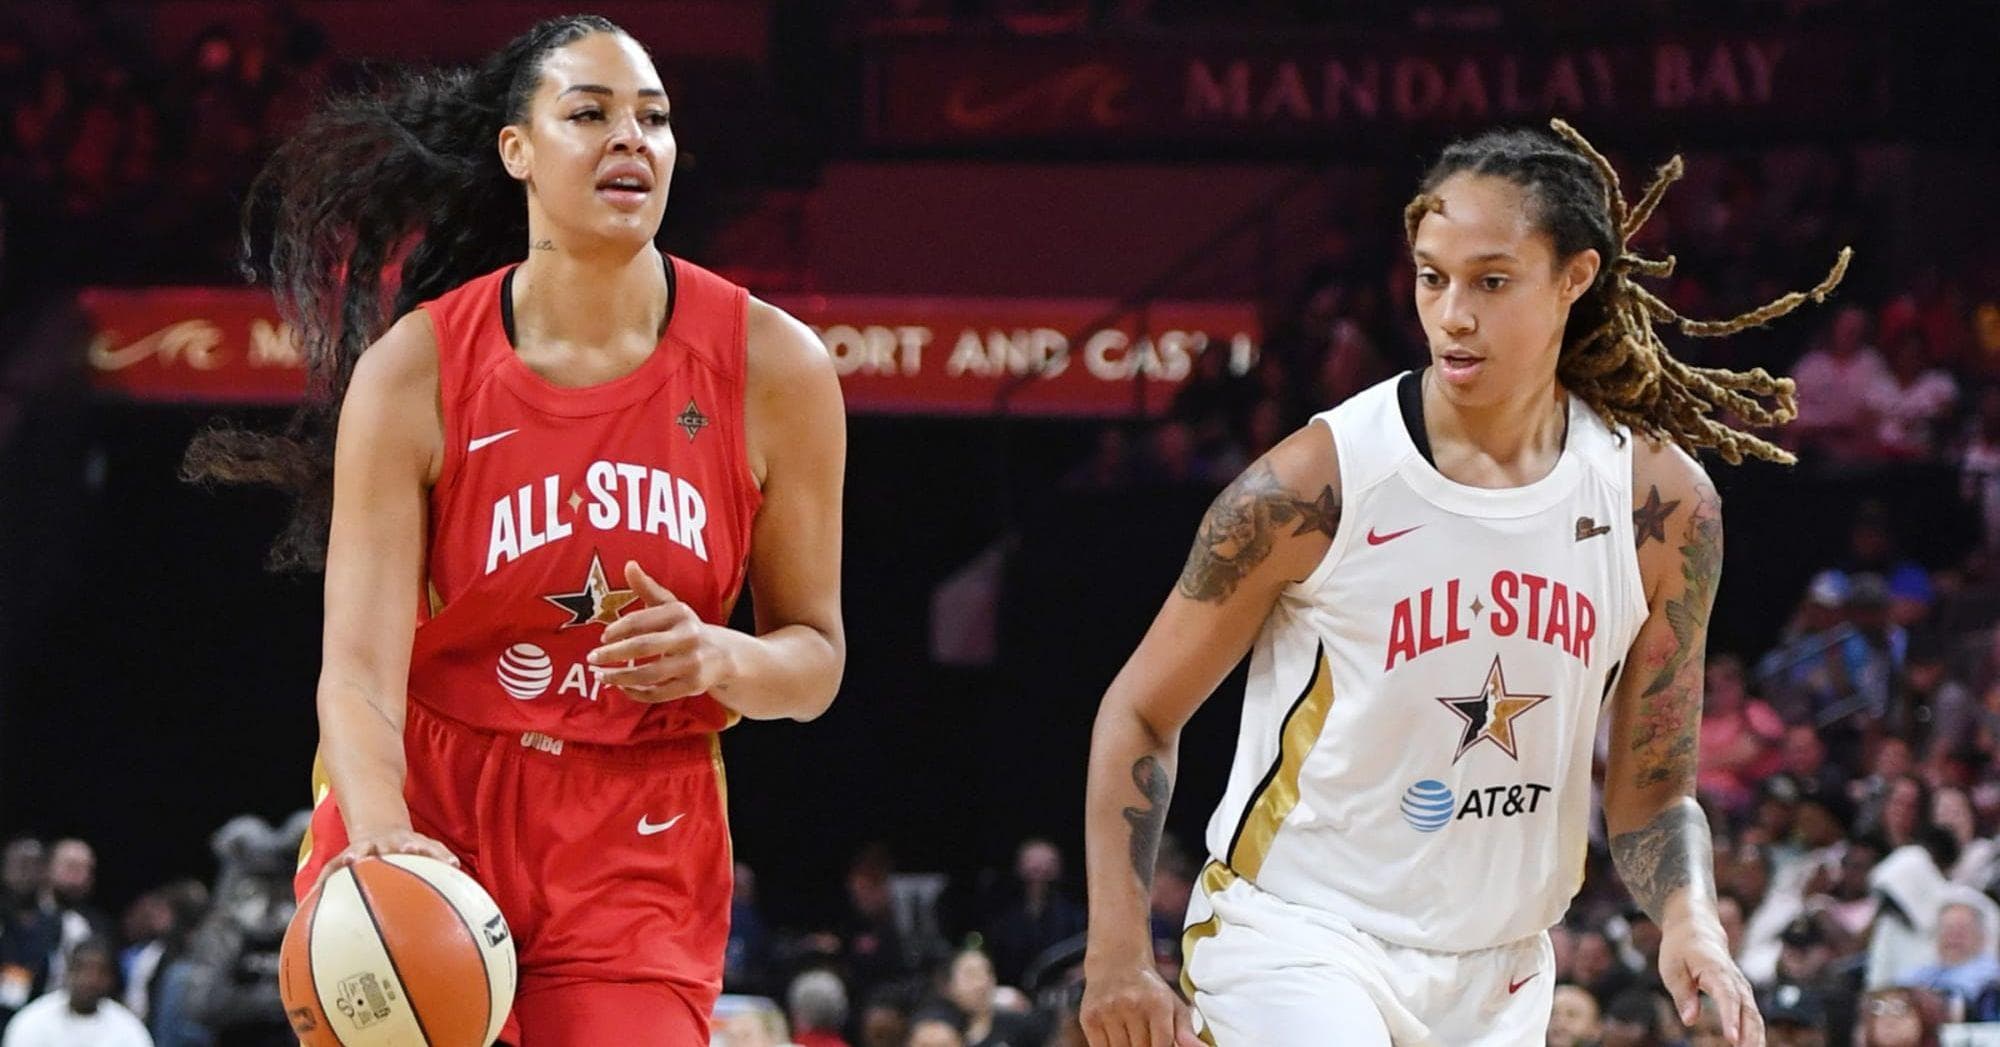 The Best WNBA Players Right Now, Ranked